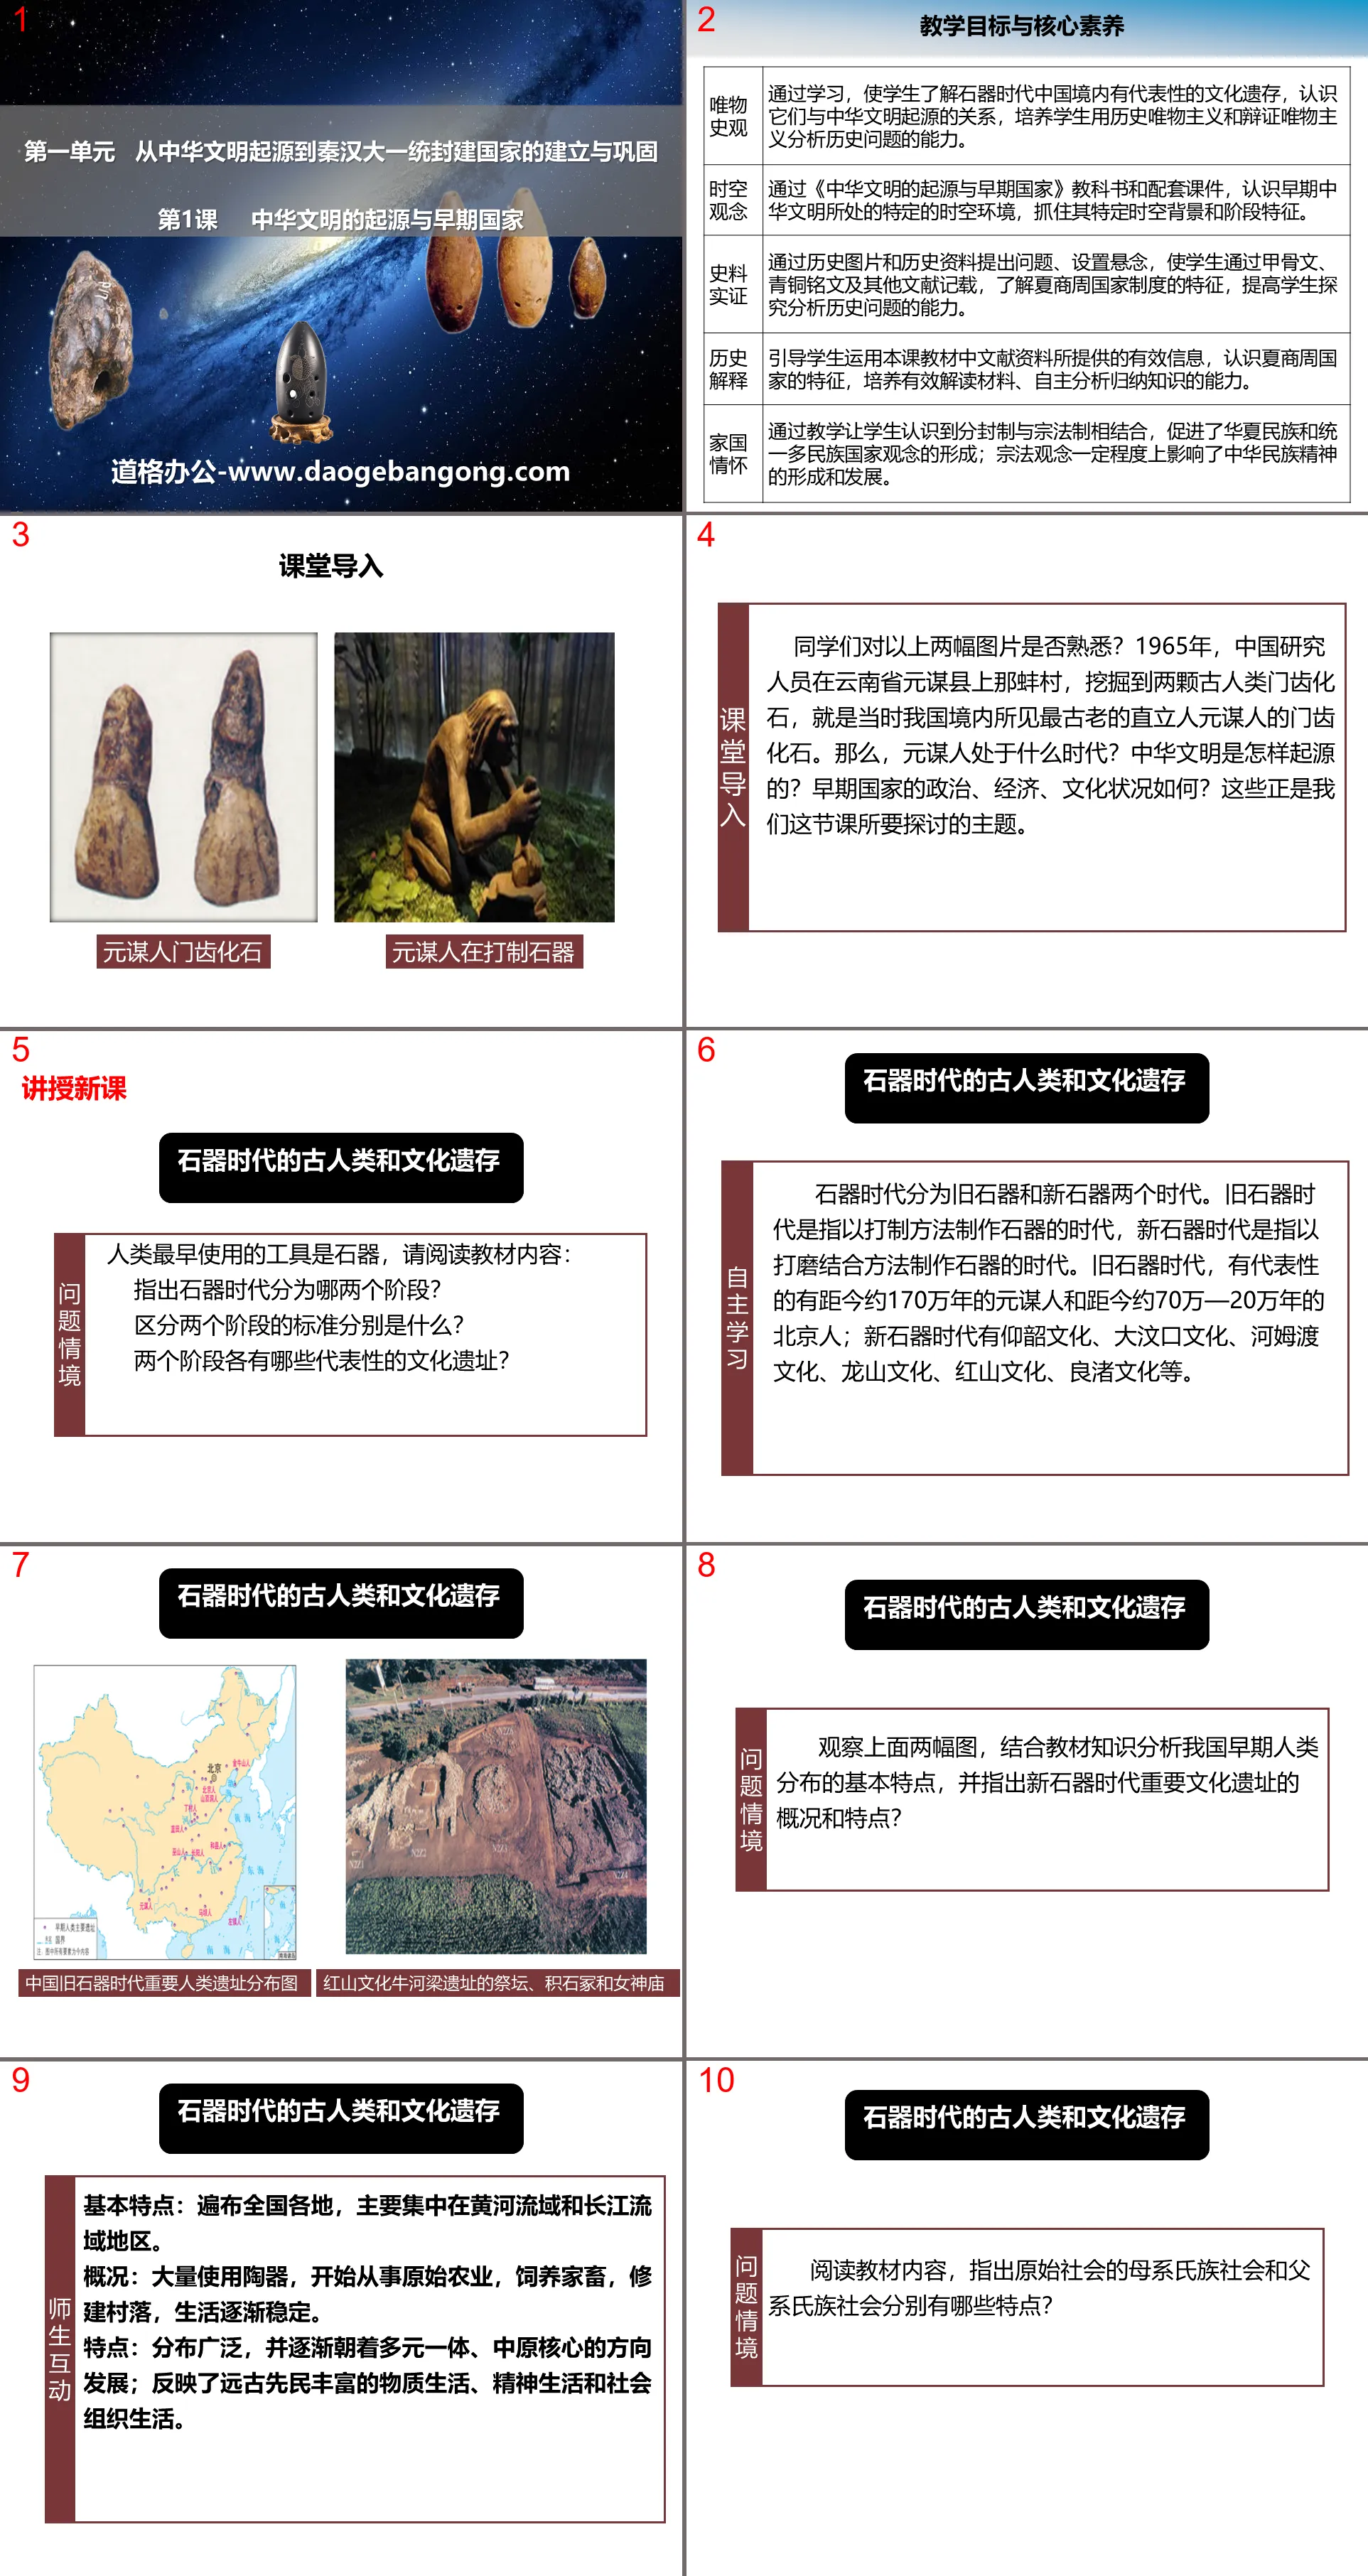 "The Origin of Chinese Civilization and Early States" PPT download from the origin of Chinese civilization to the establishment and consolidation of the unified feudal state of Qin and Han Dynasties